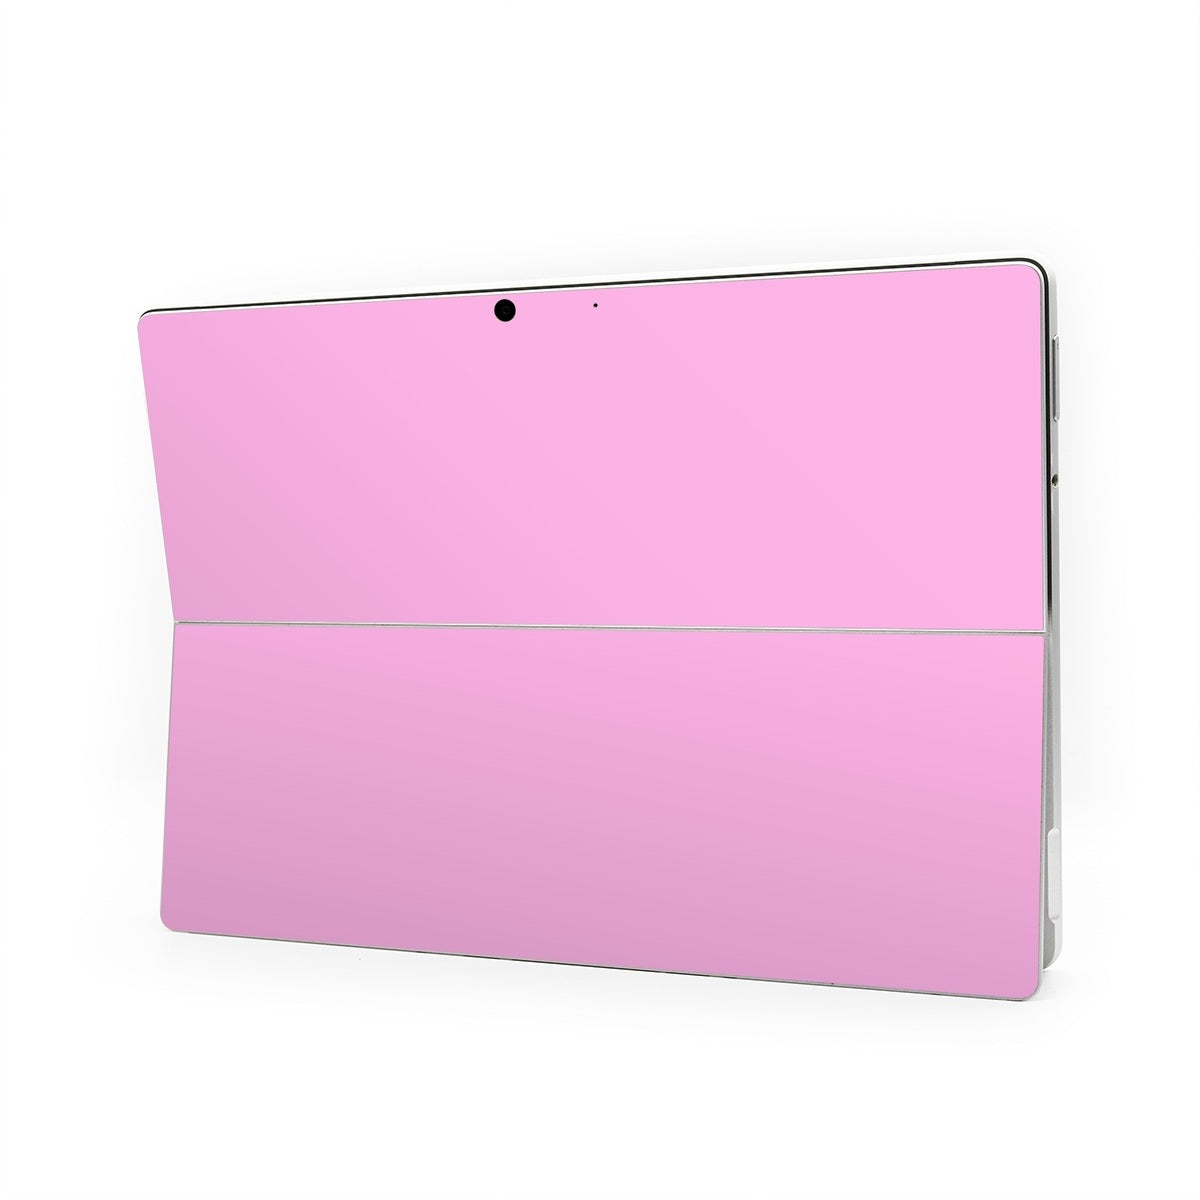 Solid State Pink - Microsoft Surface Pro Skin